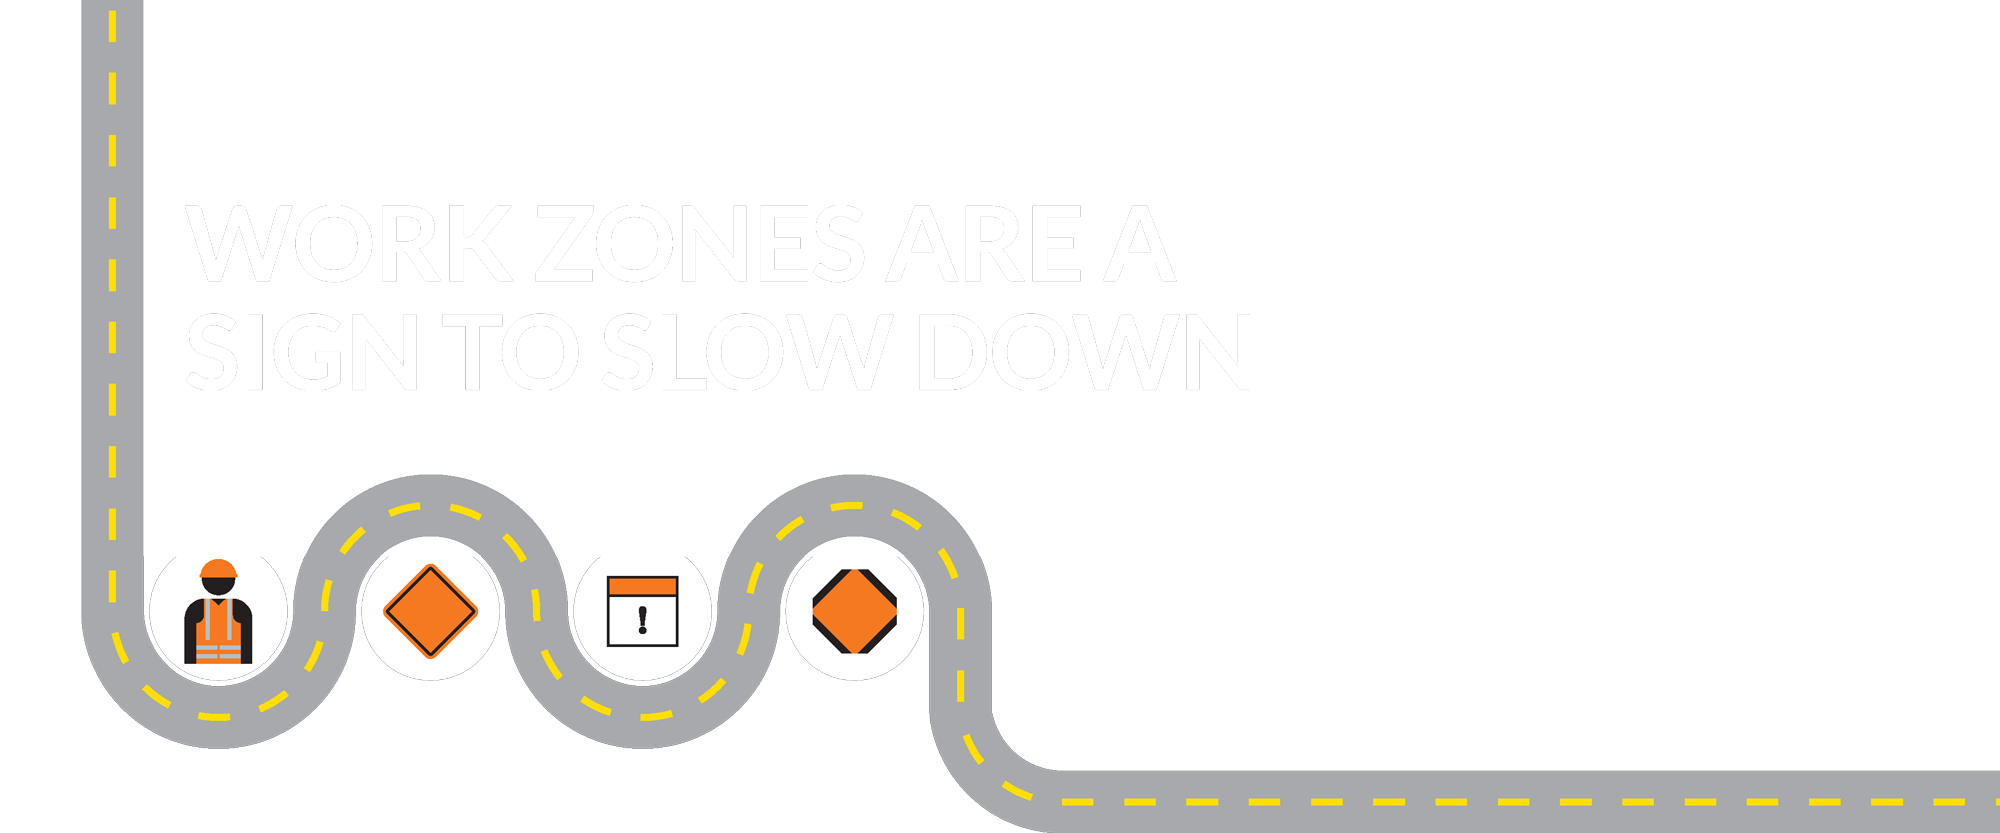 Work Zones Are a Sign to Slow Down title